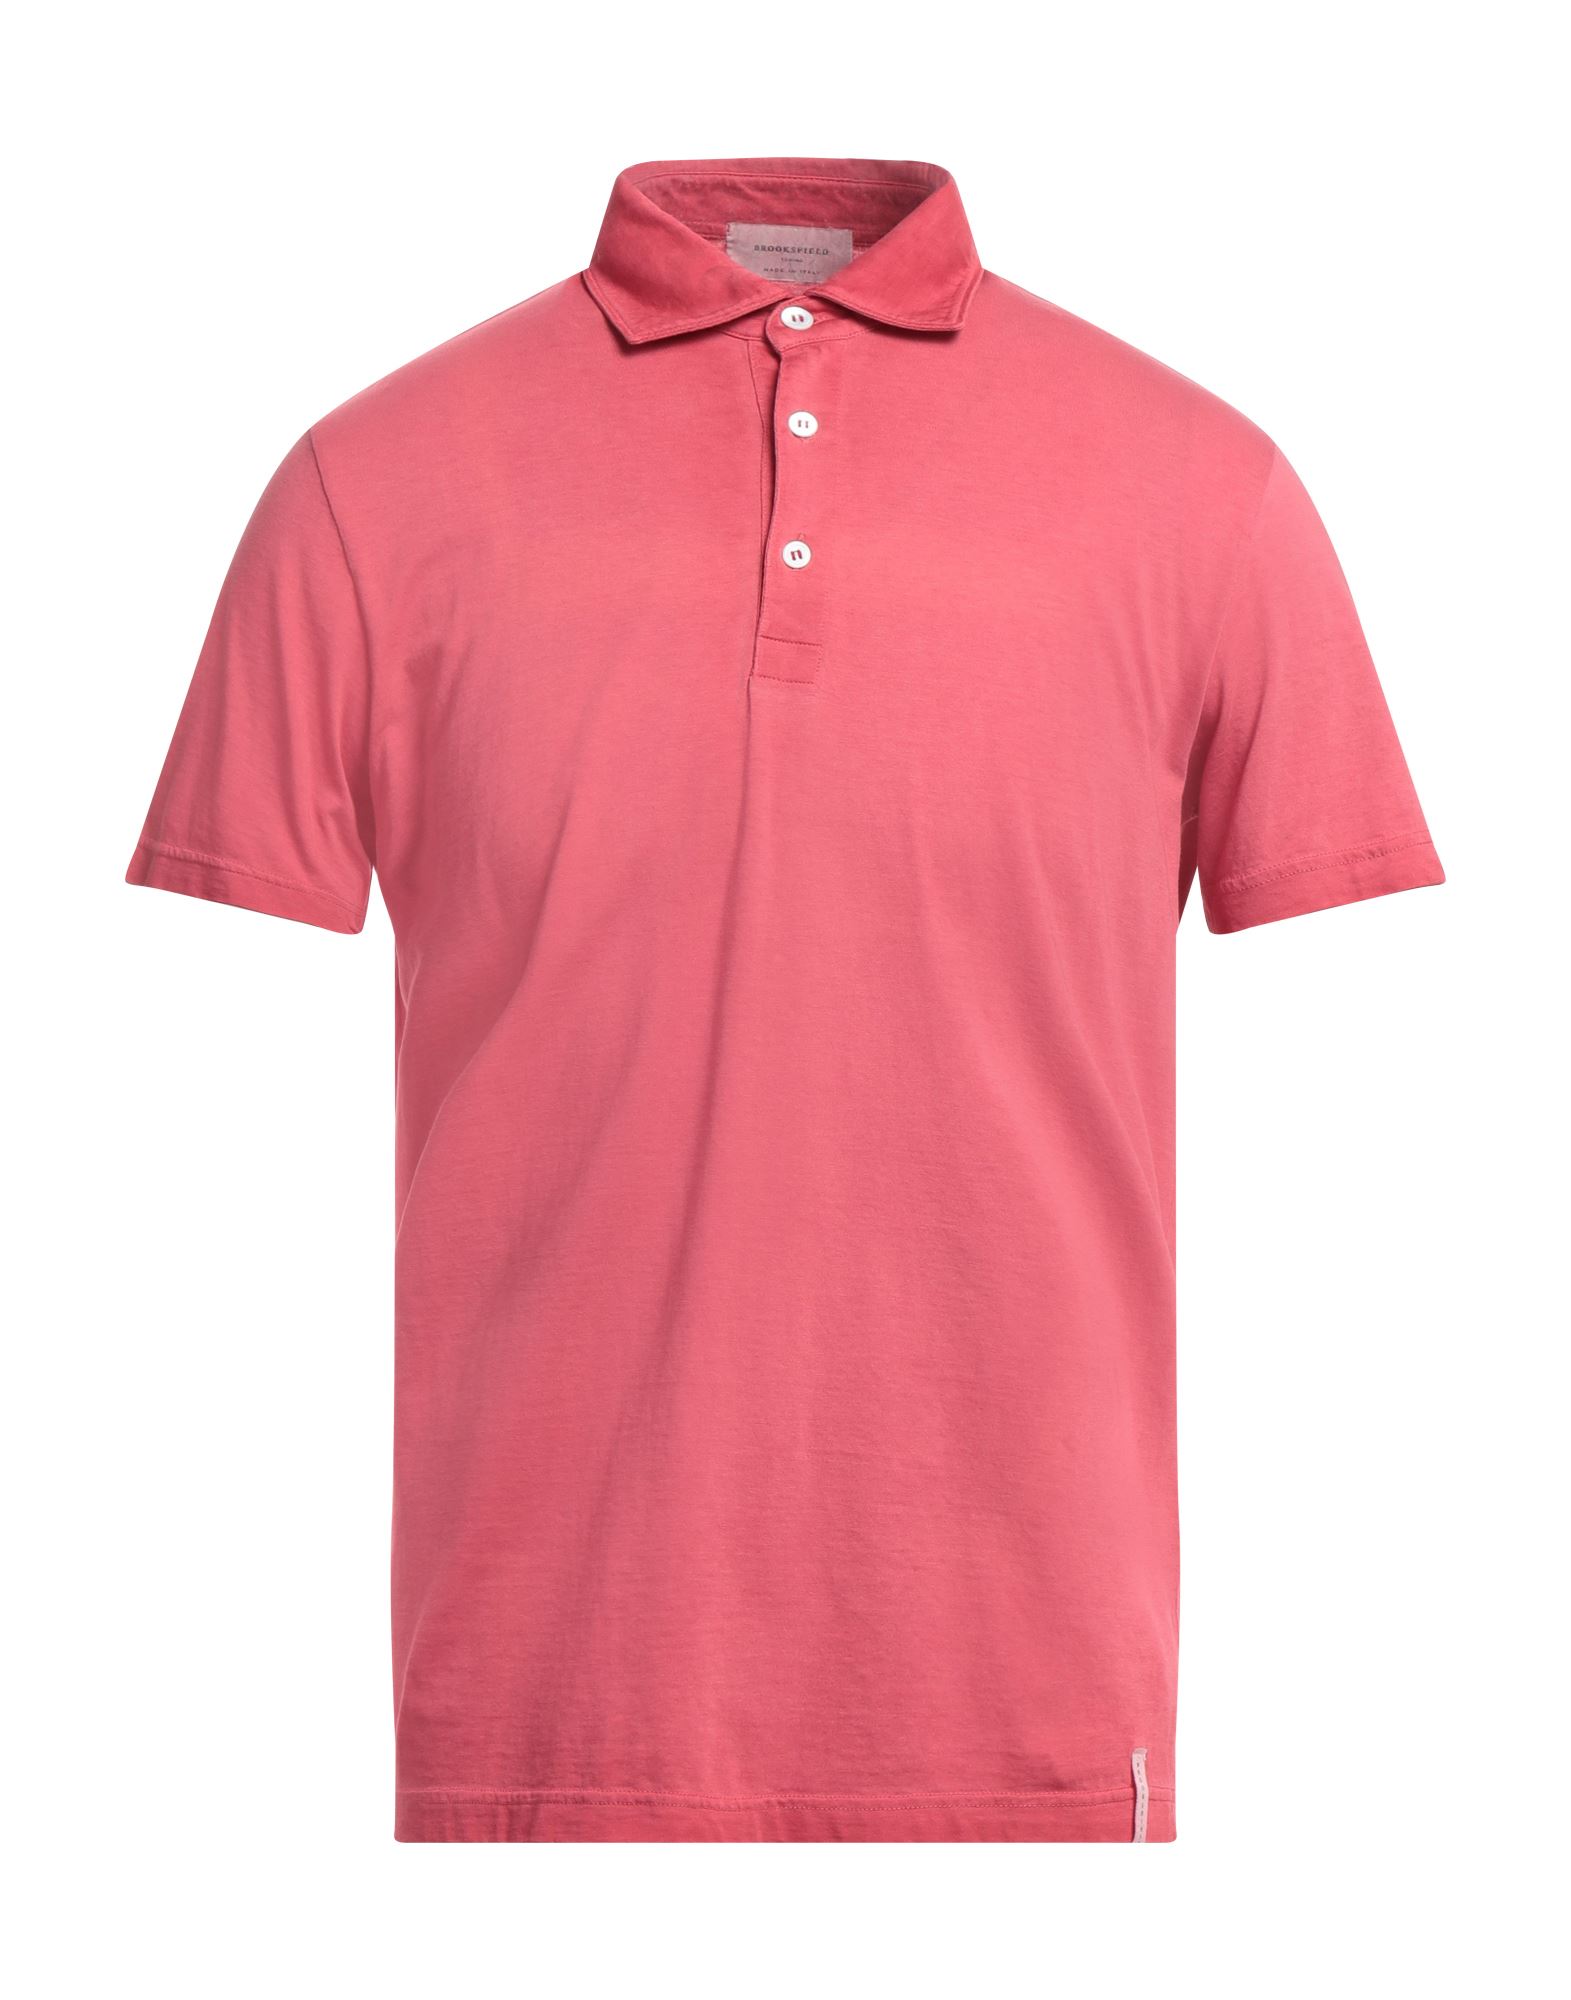 BROOKSFIELD BROOKSFIELD MAN POLO SHIRT CORAL SIZE 46 COTTON